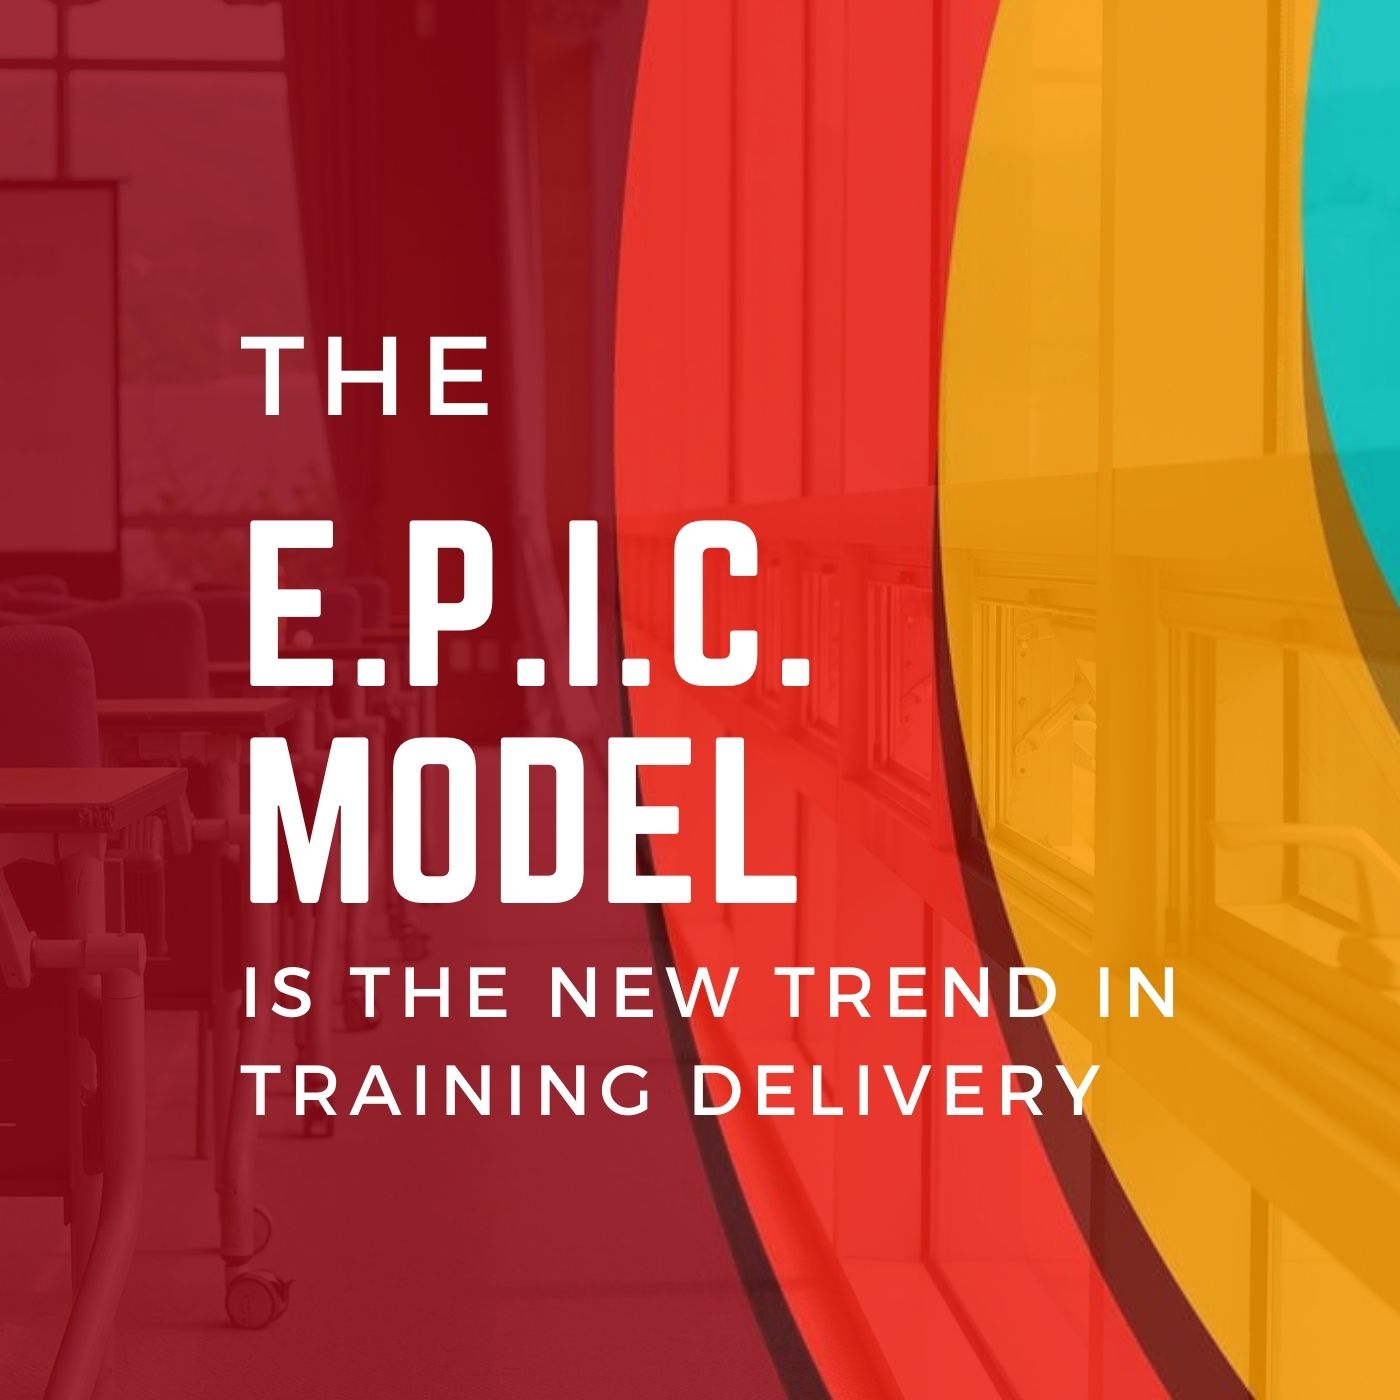 The EPIC model